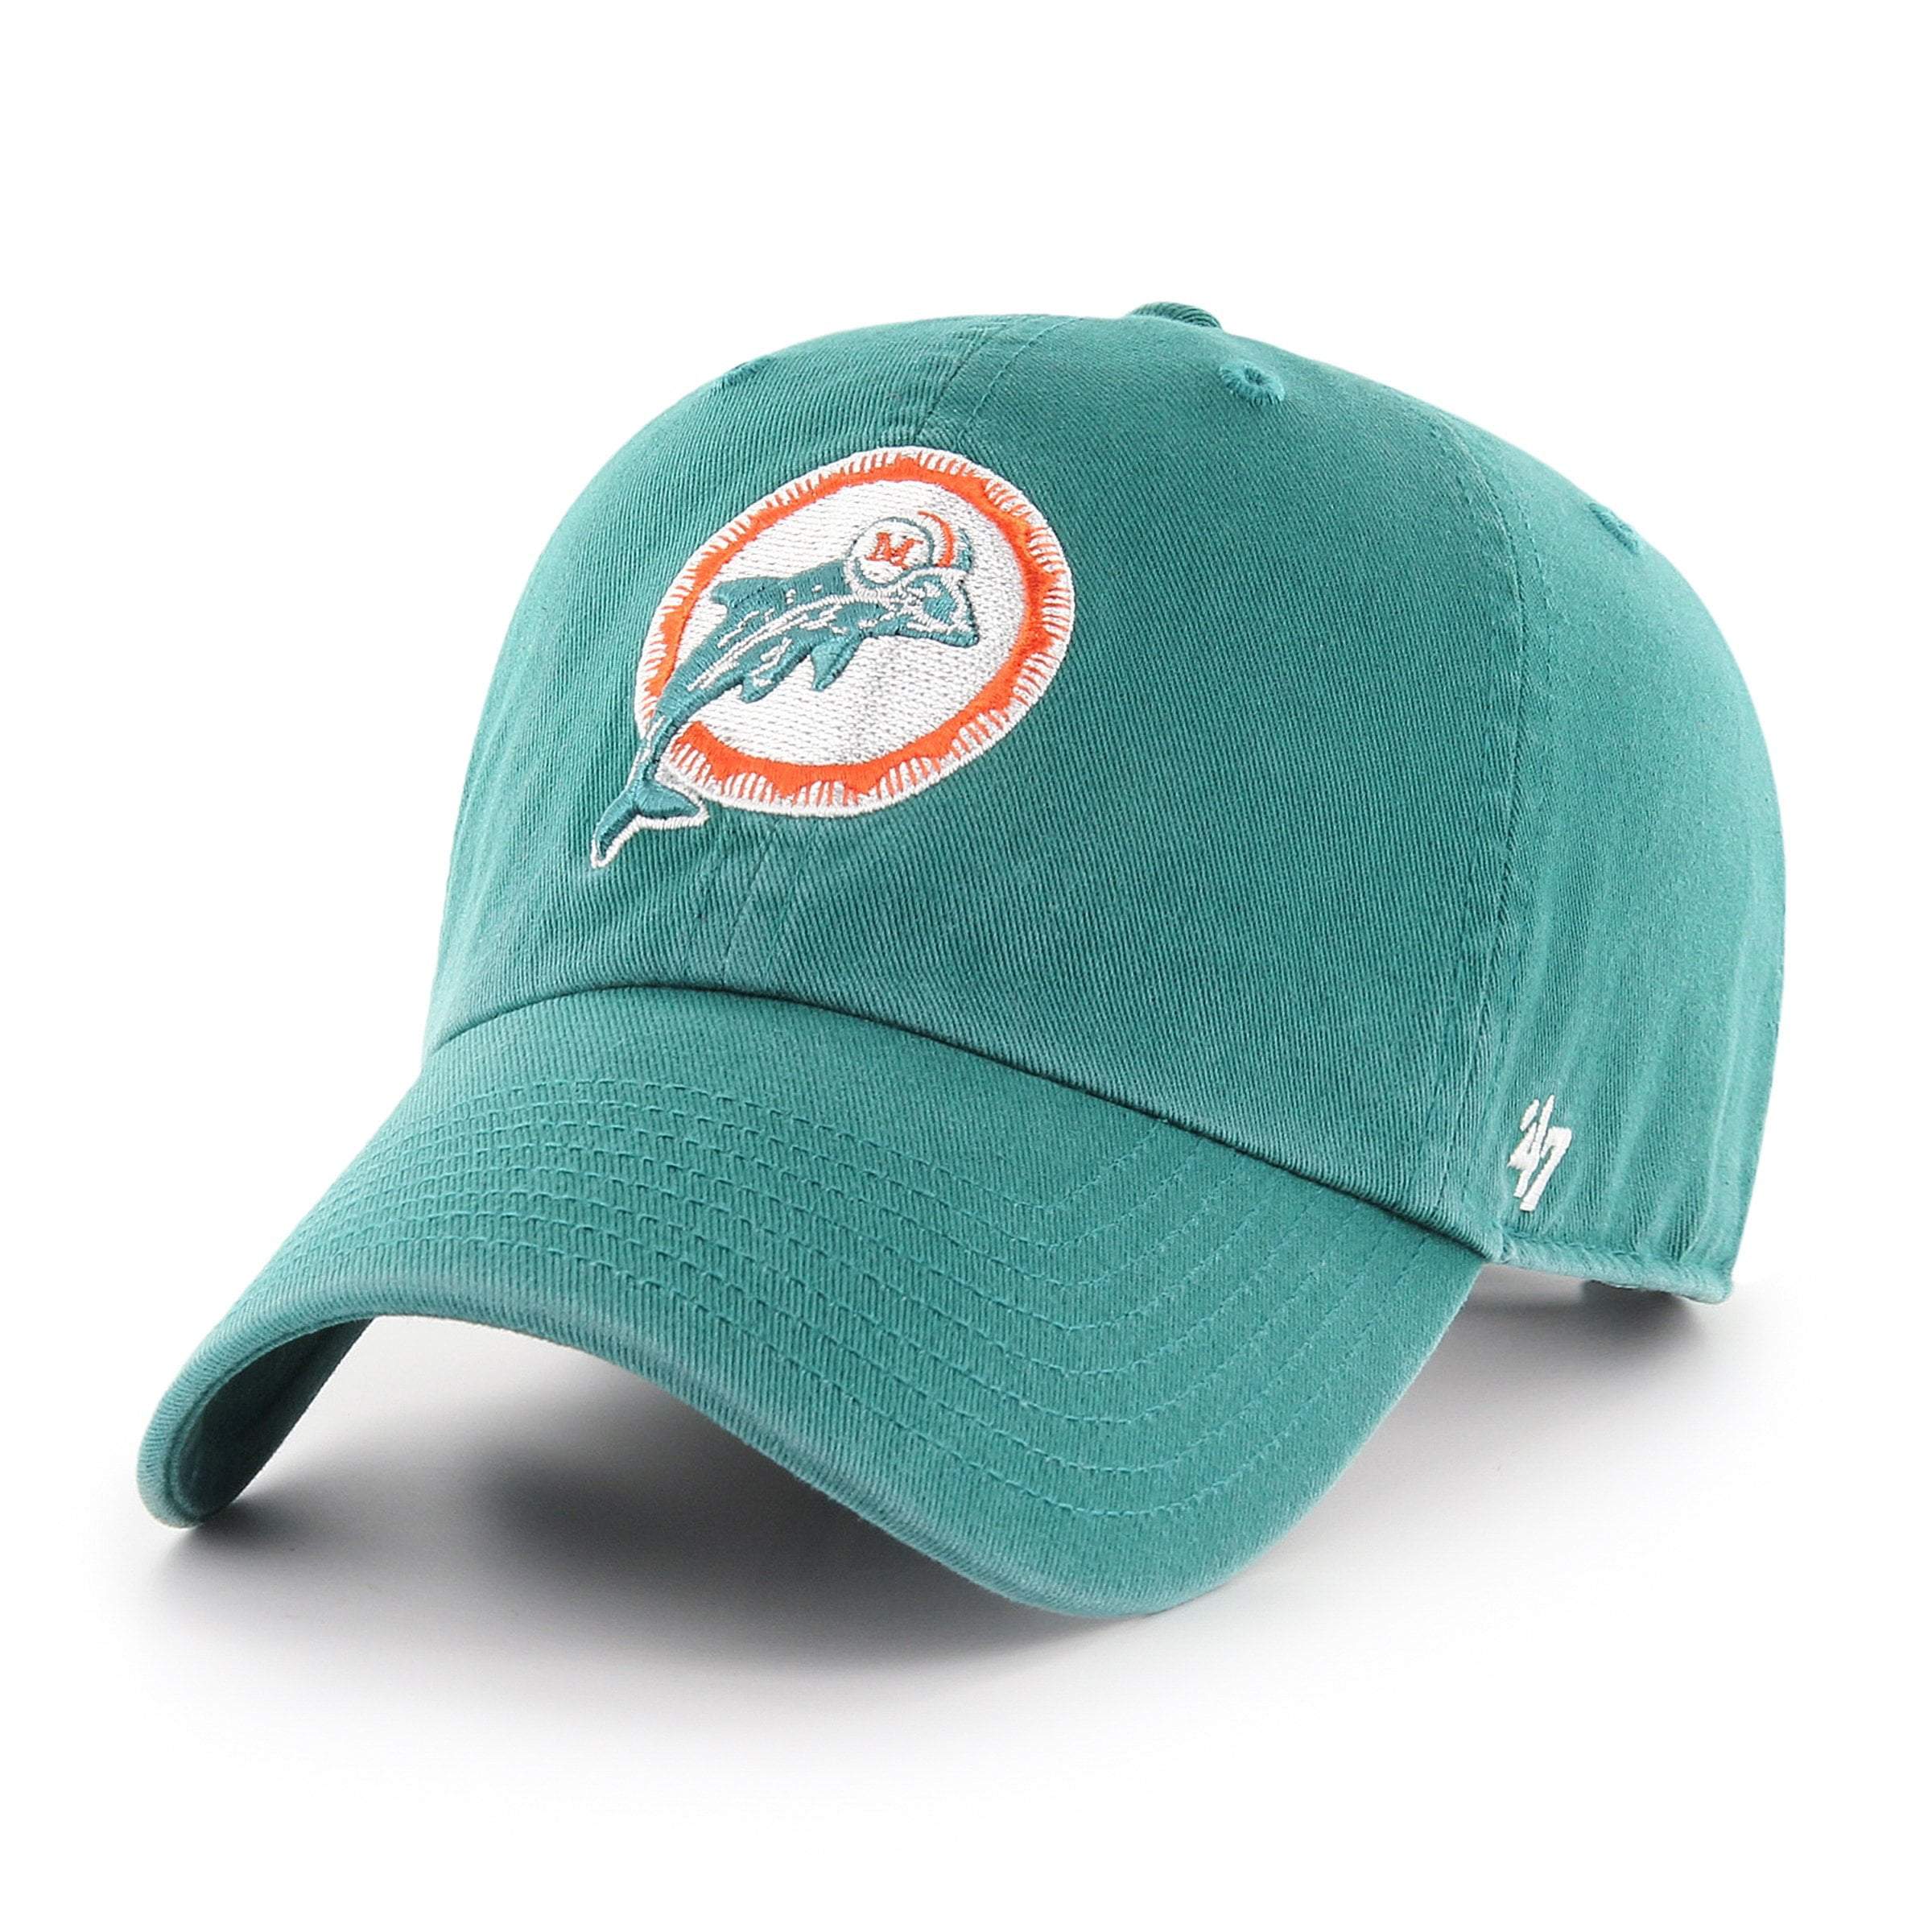 MIAMI DOLPHINS LEGACY '47 CLEAN UP